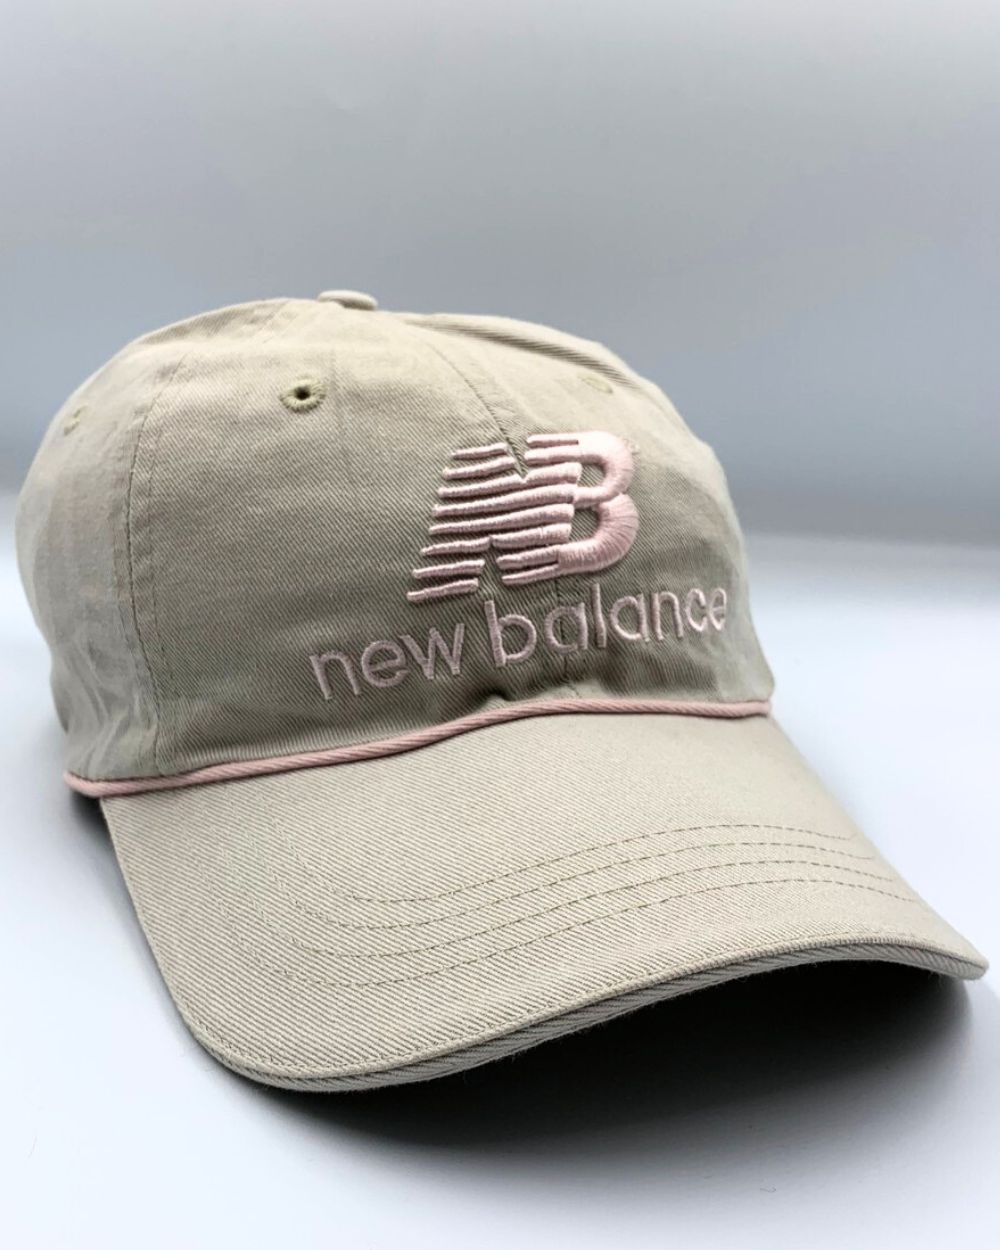 New Balance Branded Original Branded Caps For Woman